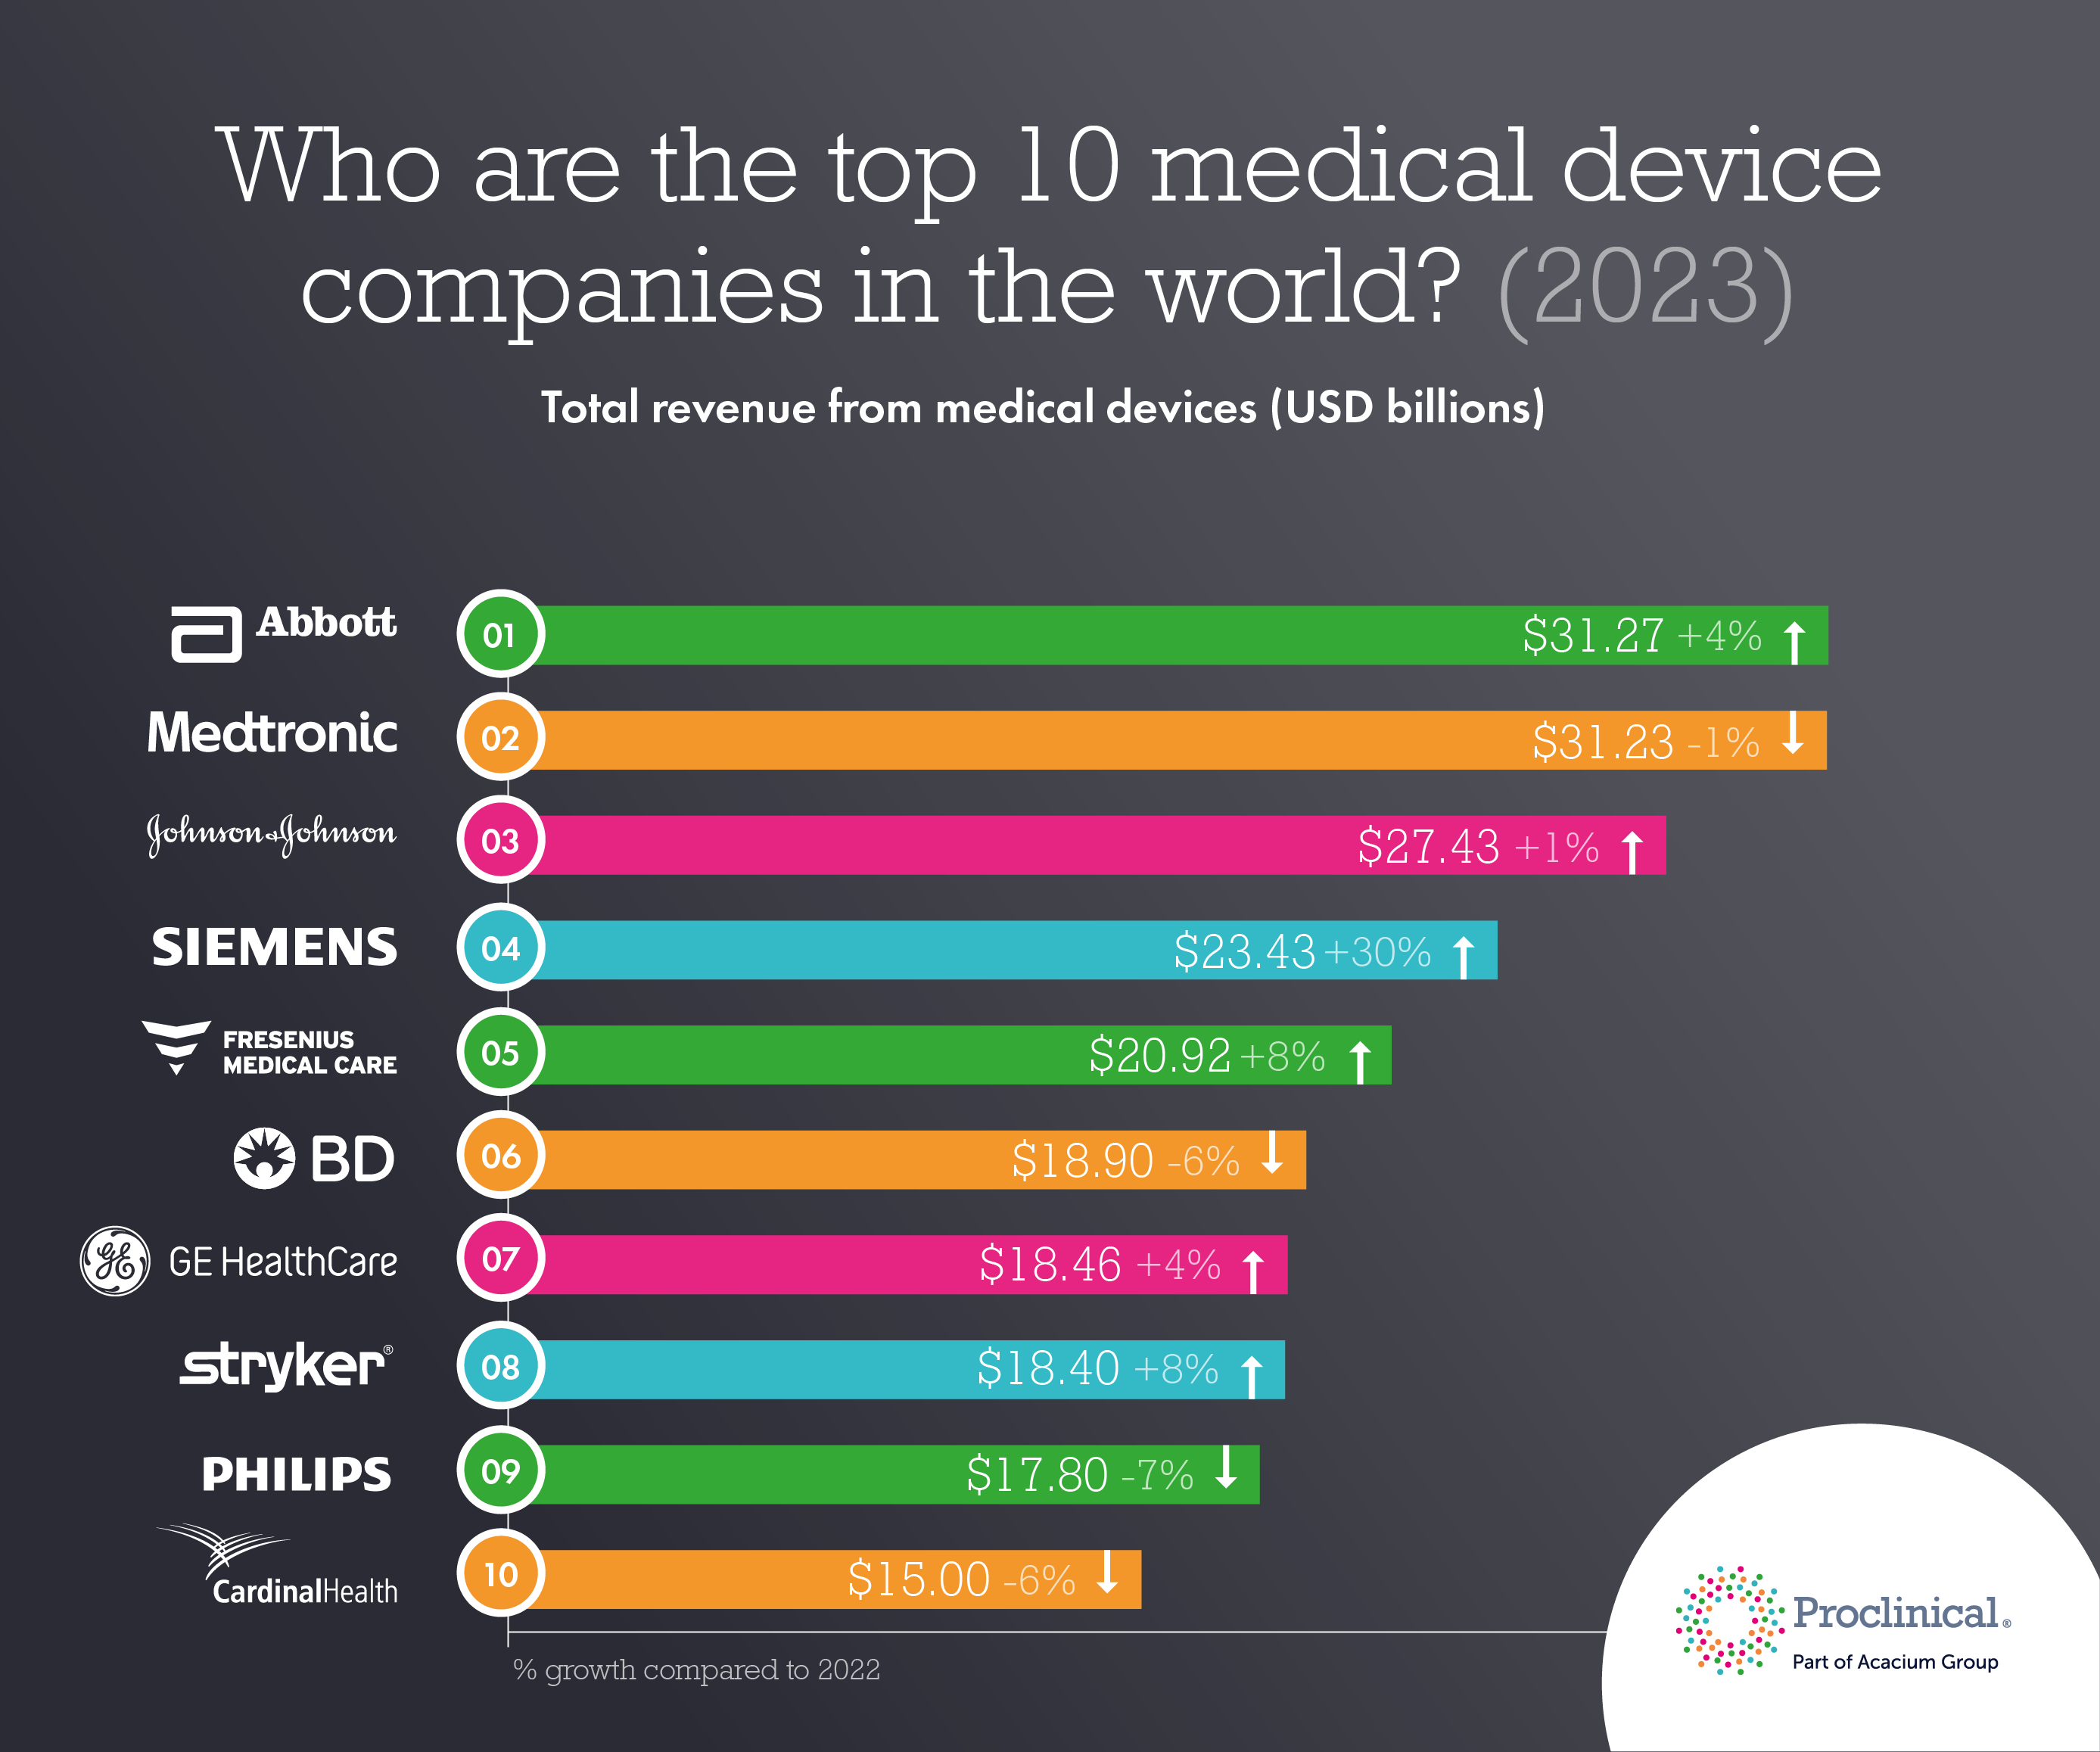 Who are the top 10 medical device companies in the world in 2023?